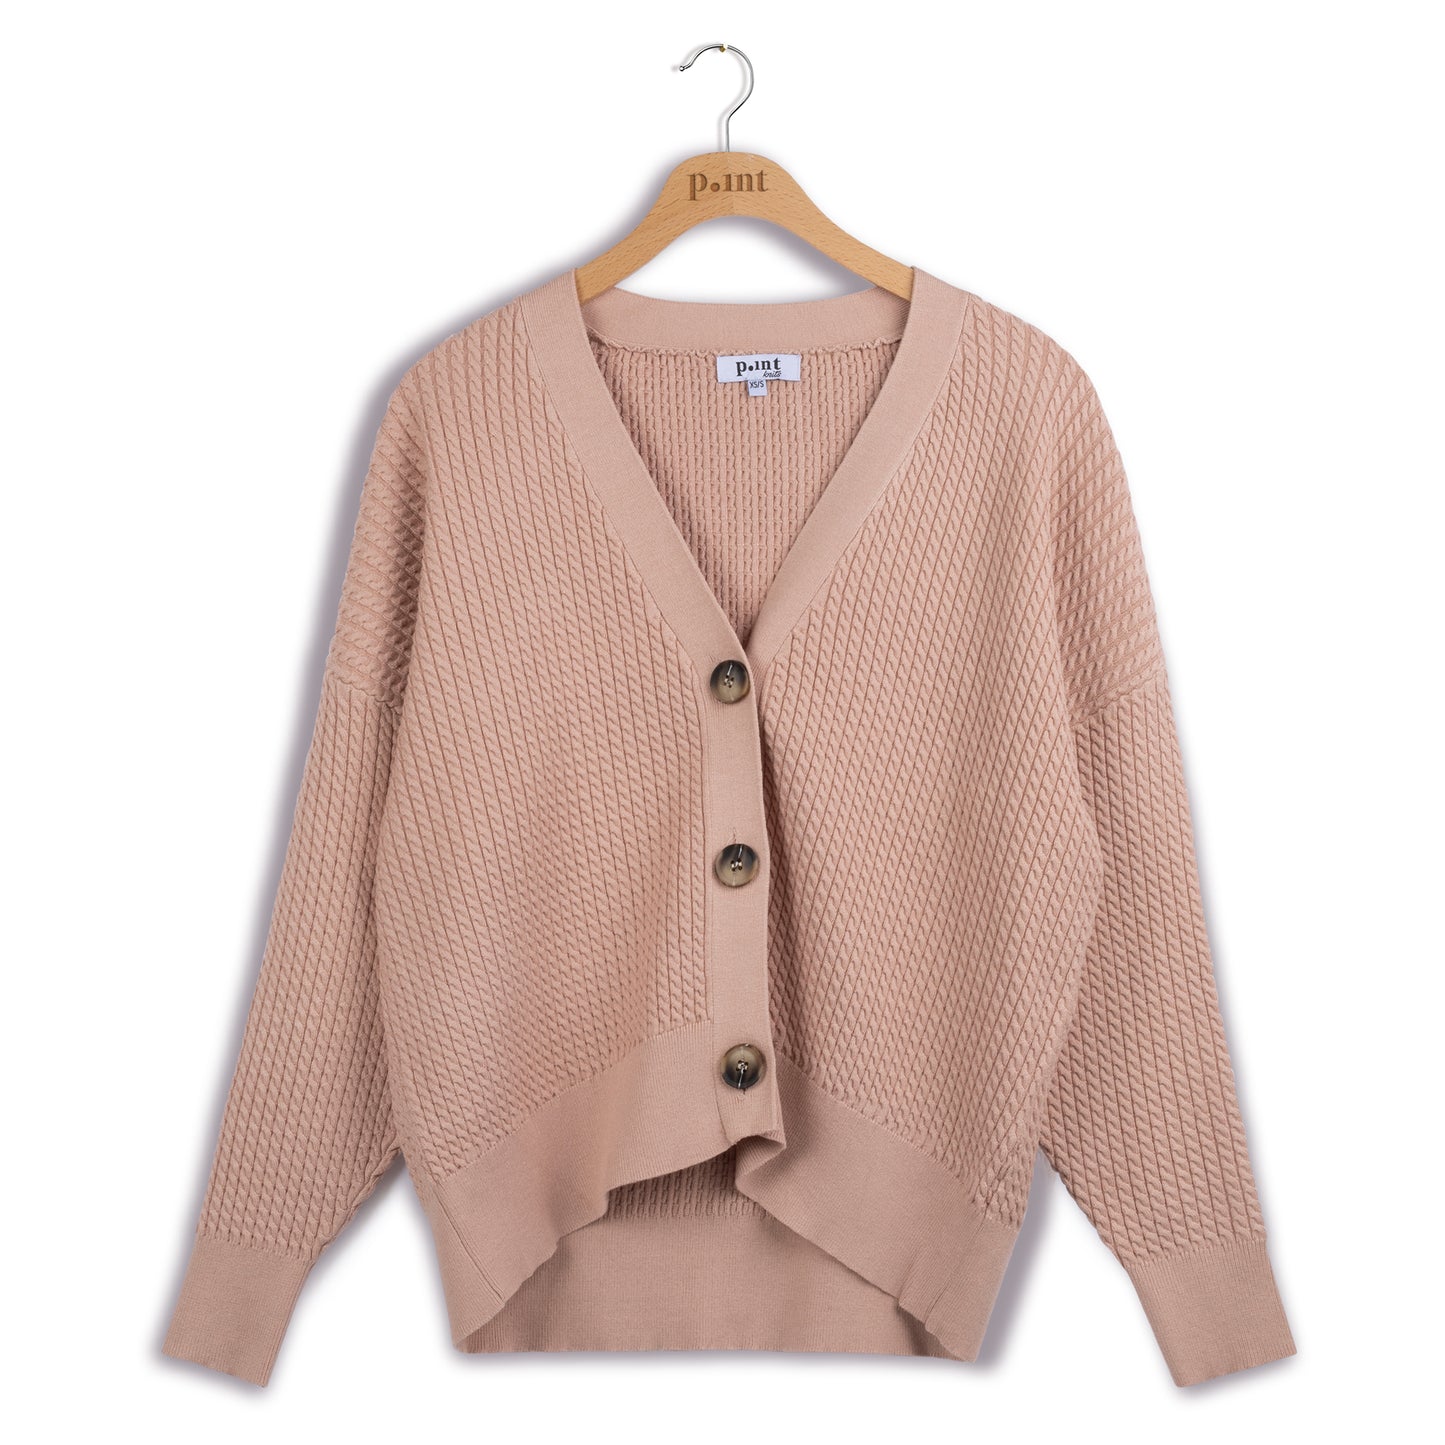 point cable cardi